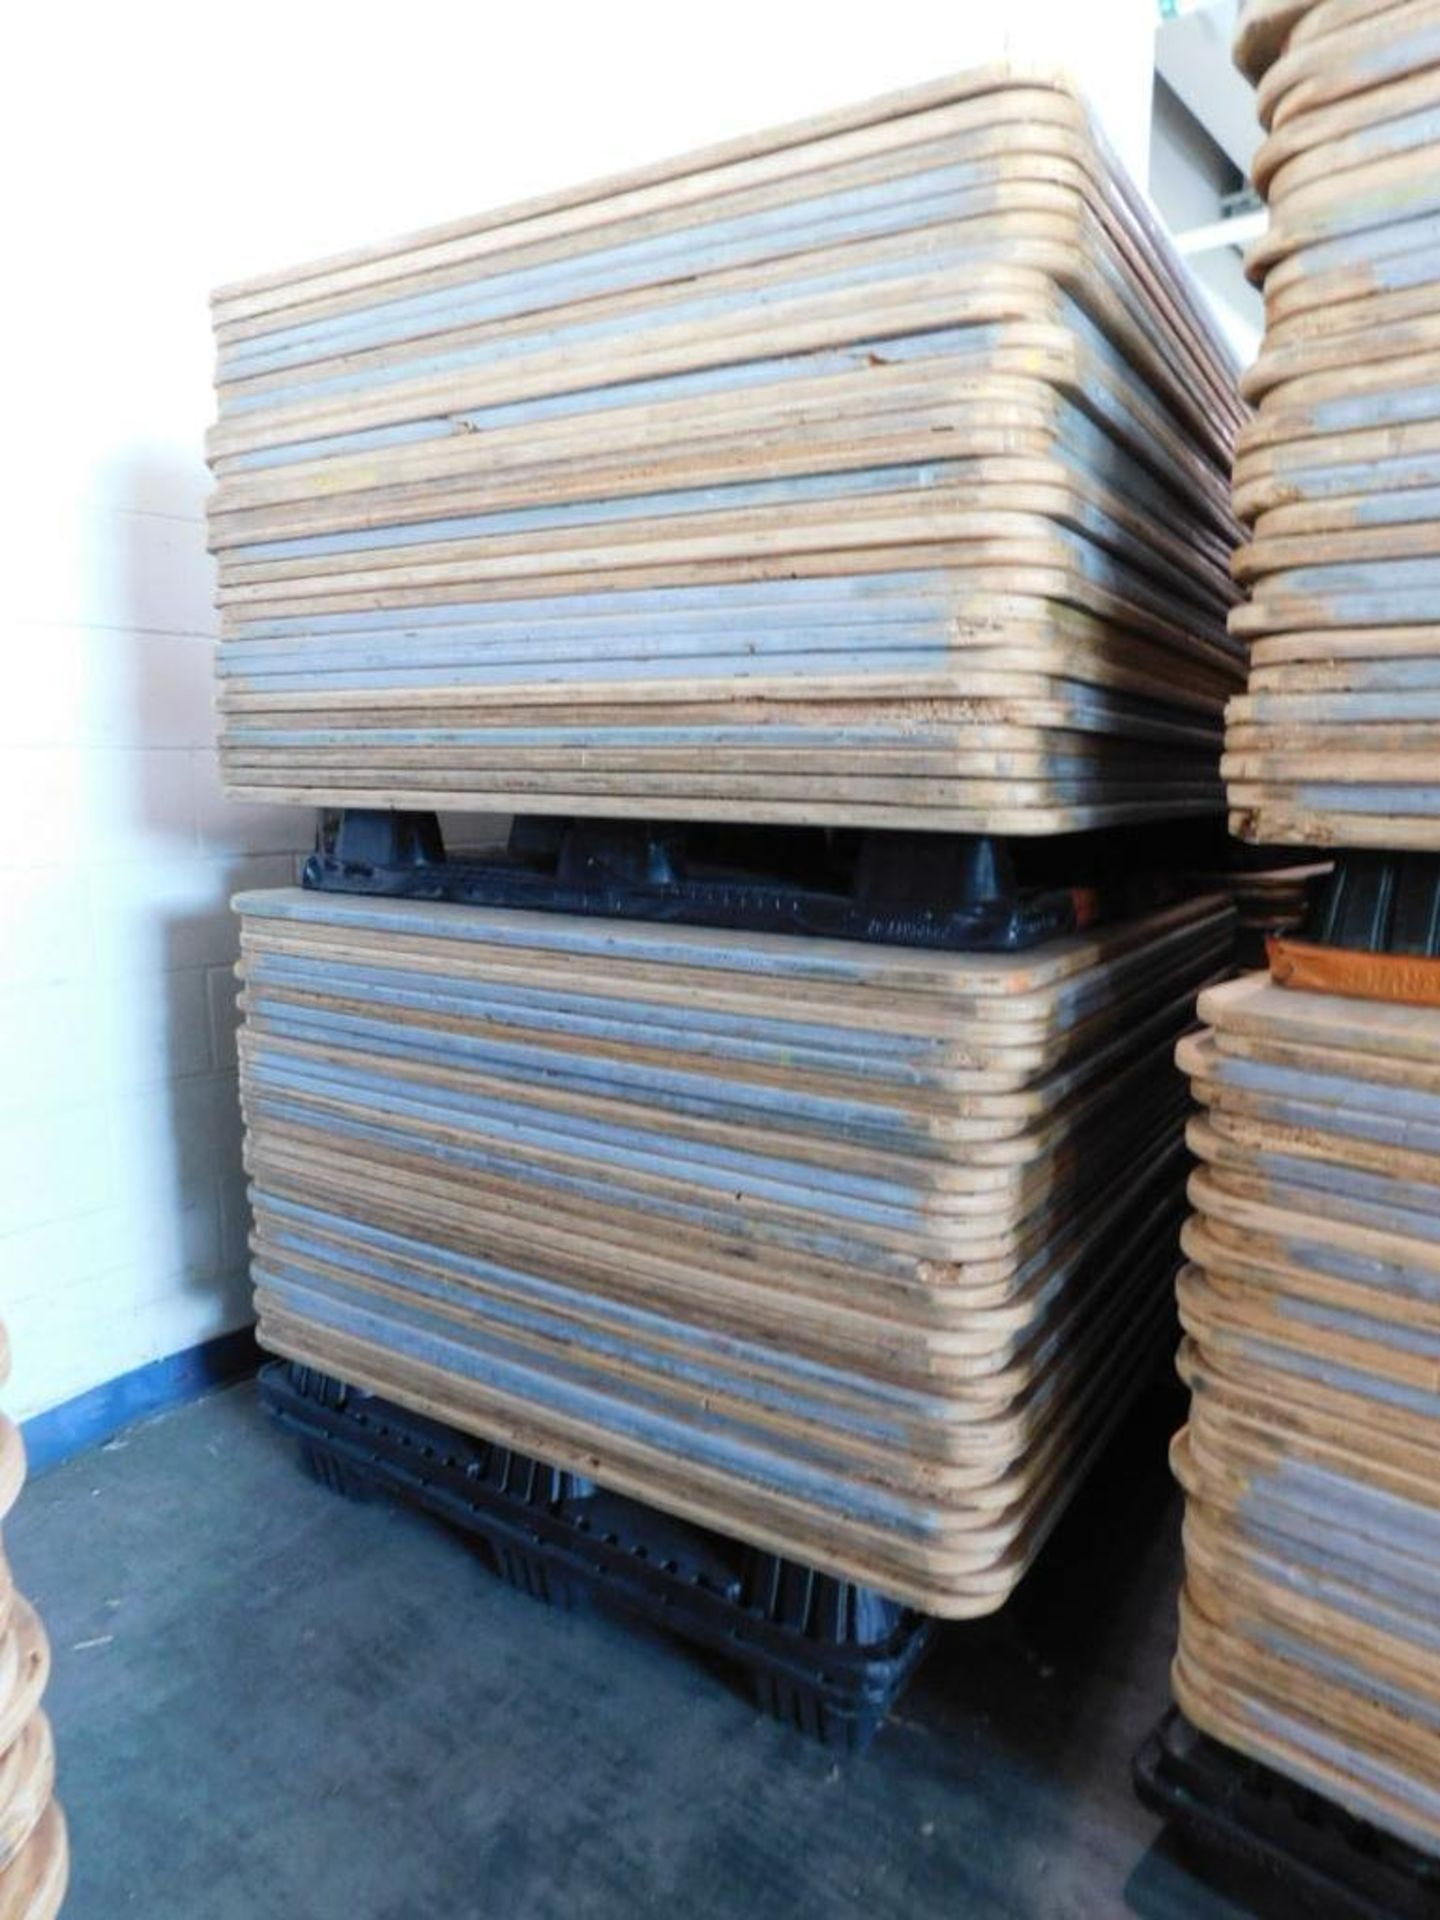 LOT: Large Quantity of 50" x 50" Wood Paper Roll Pallets on (12) Plastic Pallets (LOCATION: IN MAIL - Image 8 of 8